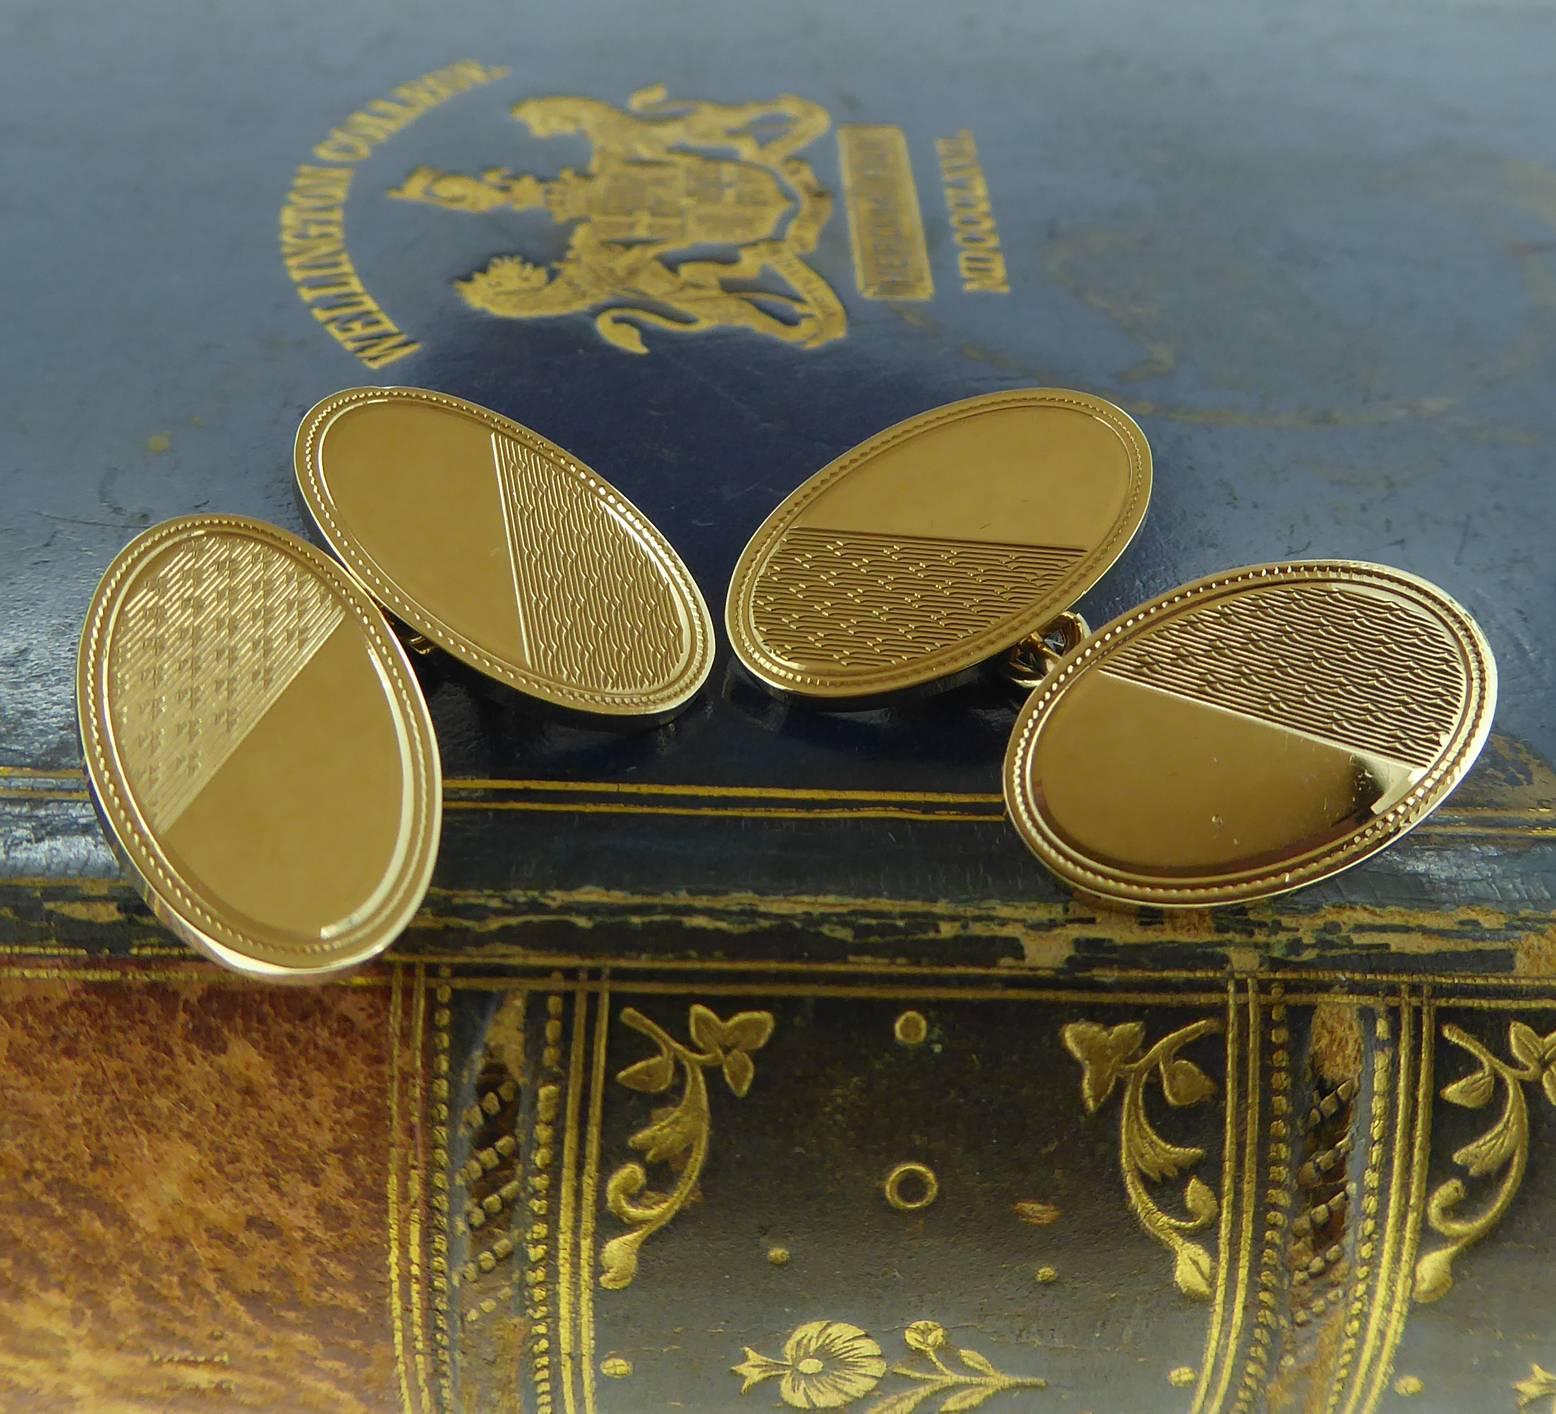 These vintage cufflinks for men from the 1950s. are a very elegant oval shape with a diagonal division of plain polished gold - where a family crest, initials or an important date may be engraved - and machine engraving.  The cufflinks were made by